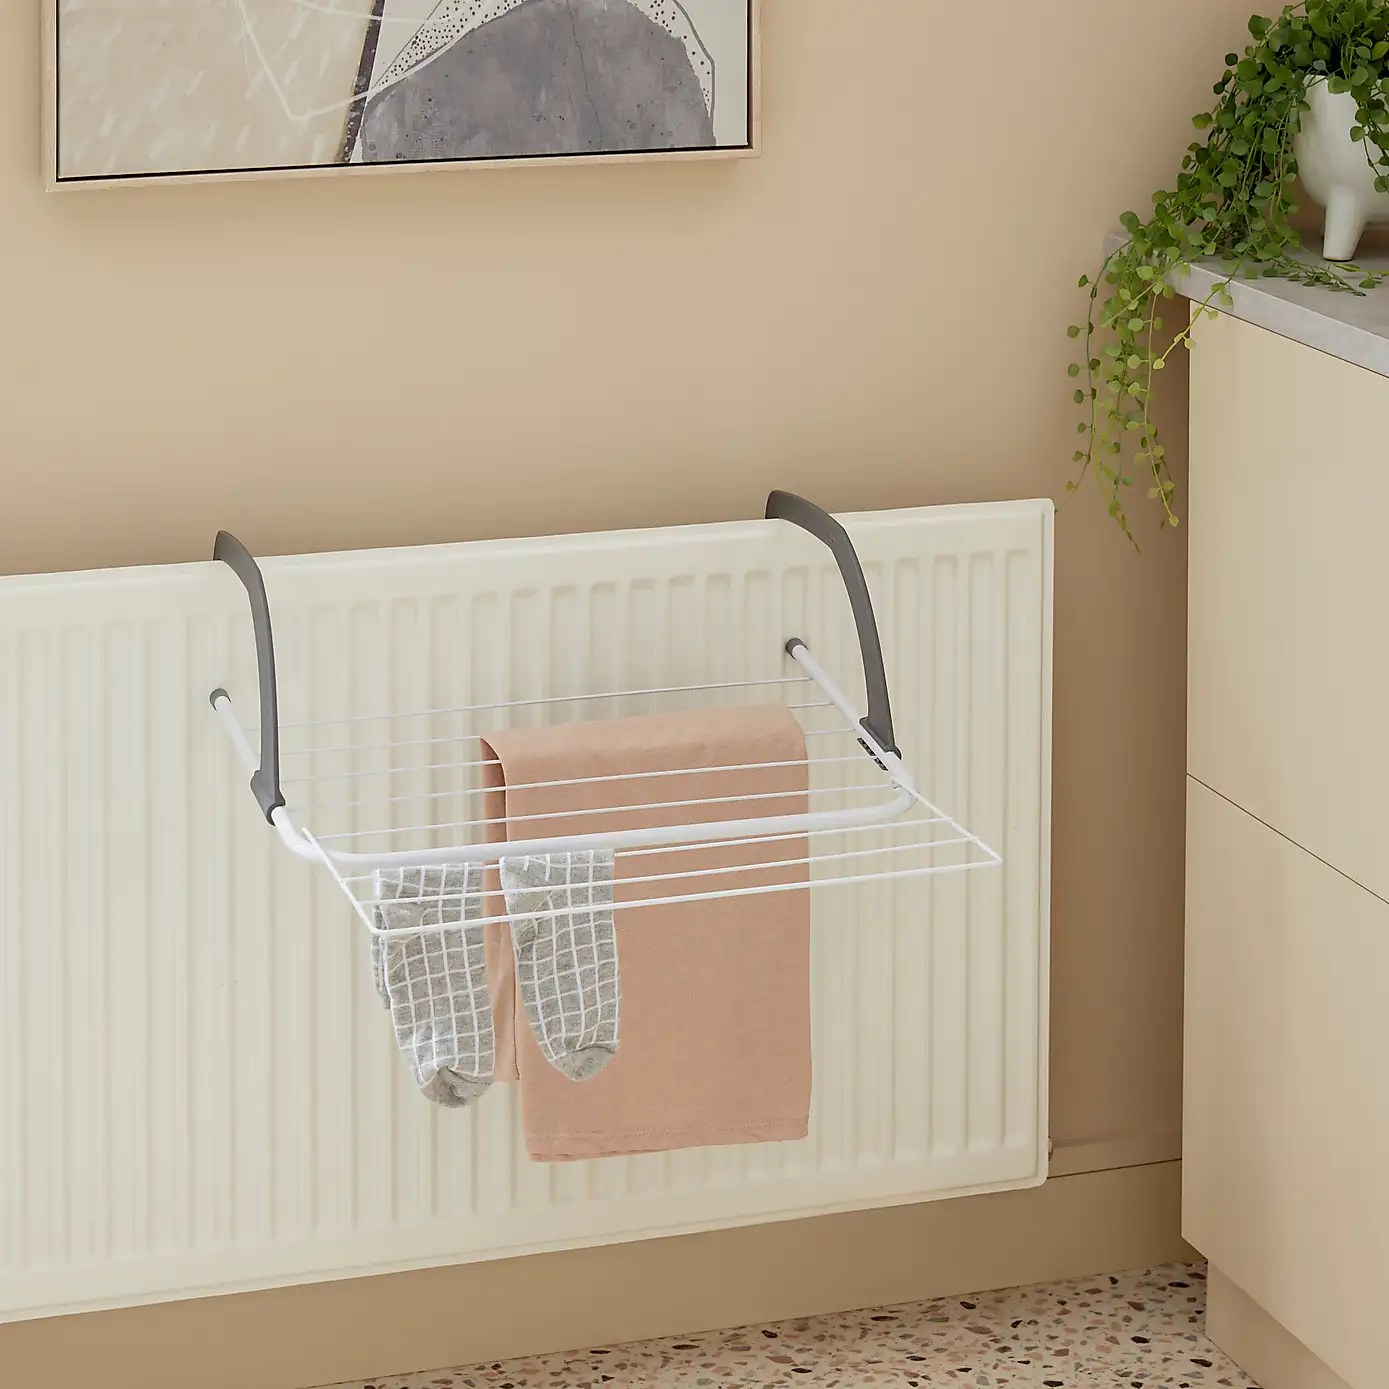 Dunelm shoppers have been rushing to buy a "brilliant" tool for drying your laundry